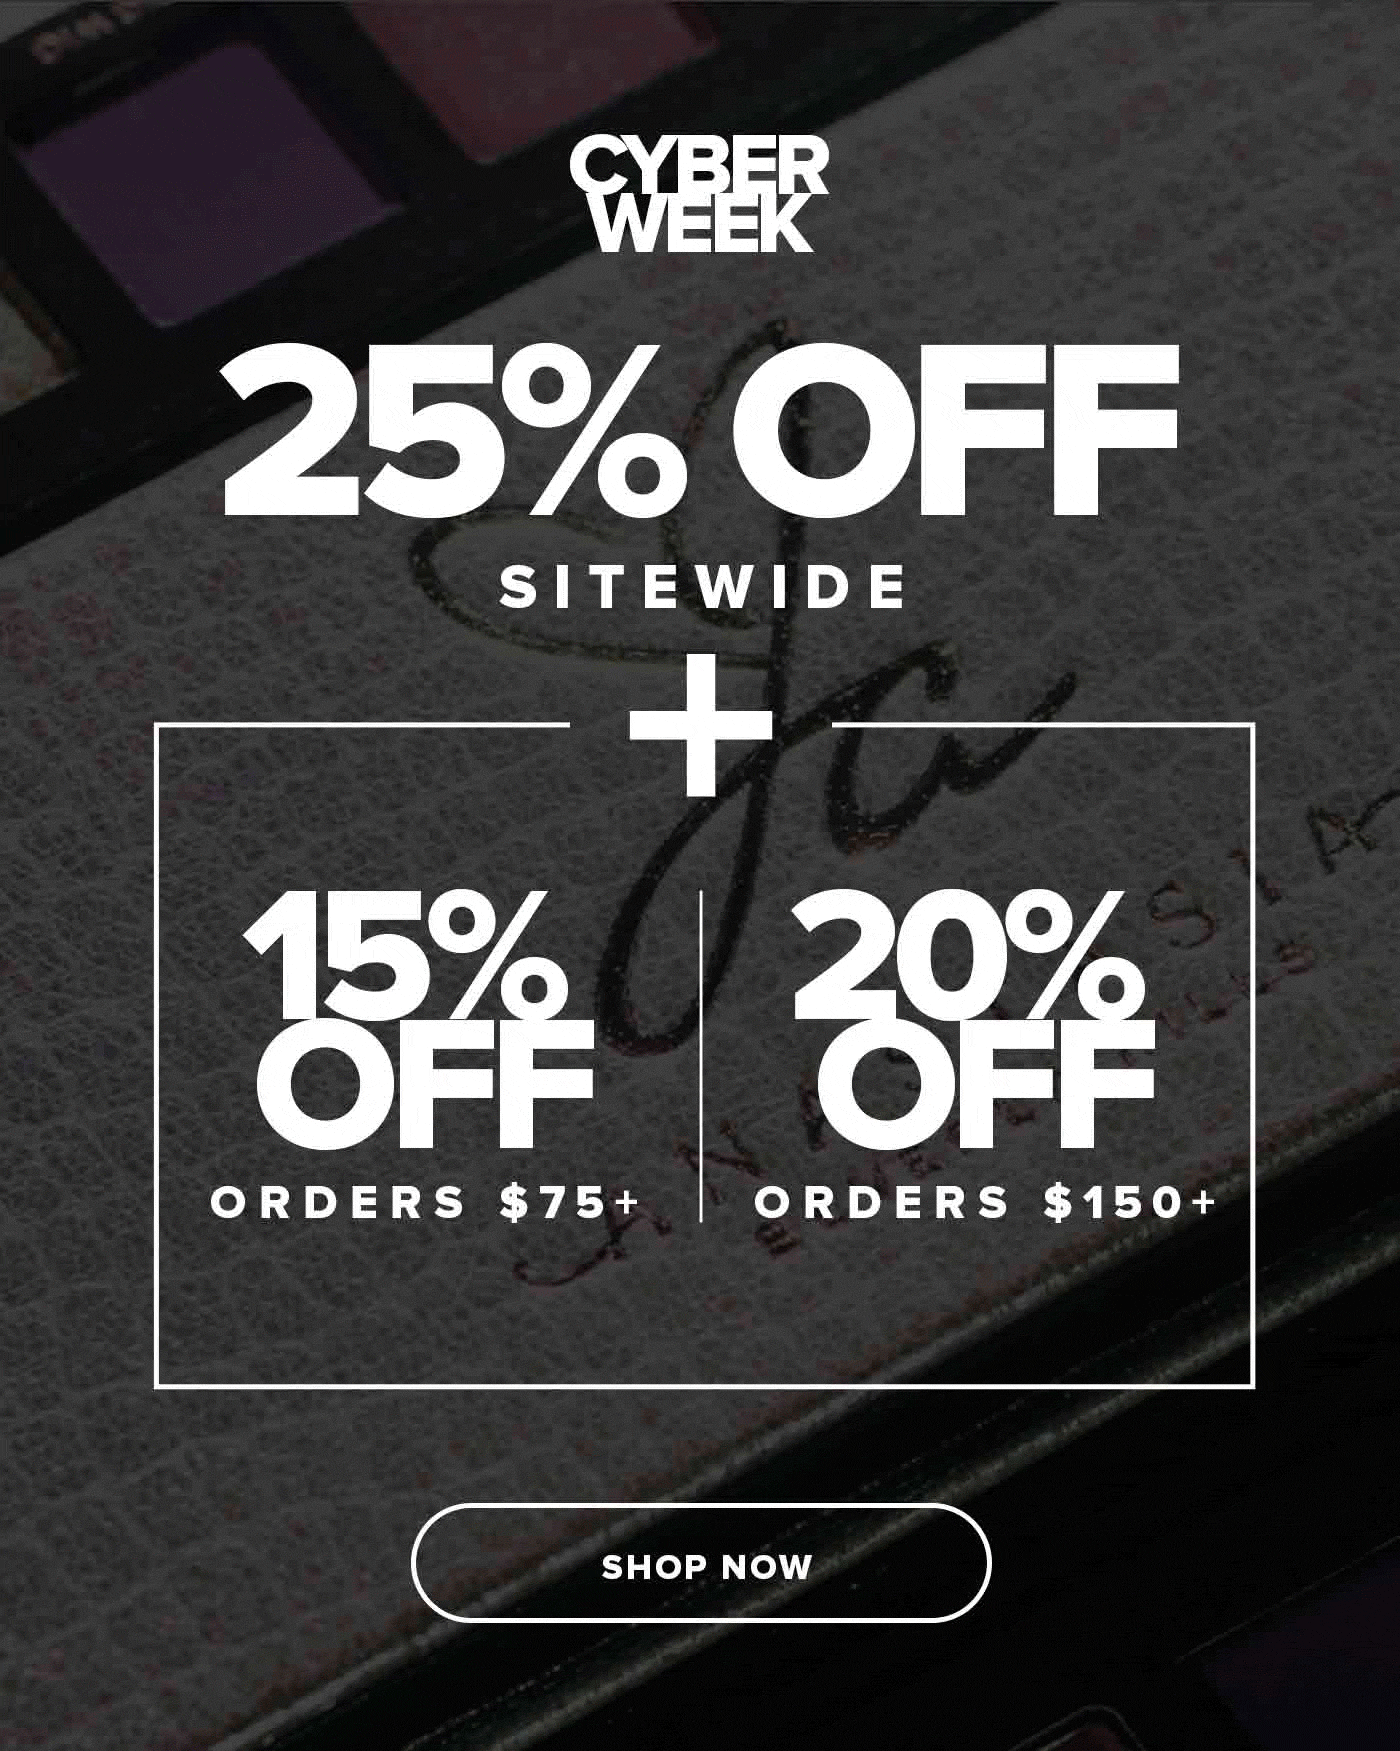 25% Off Sitewide + Buy More to Save More